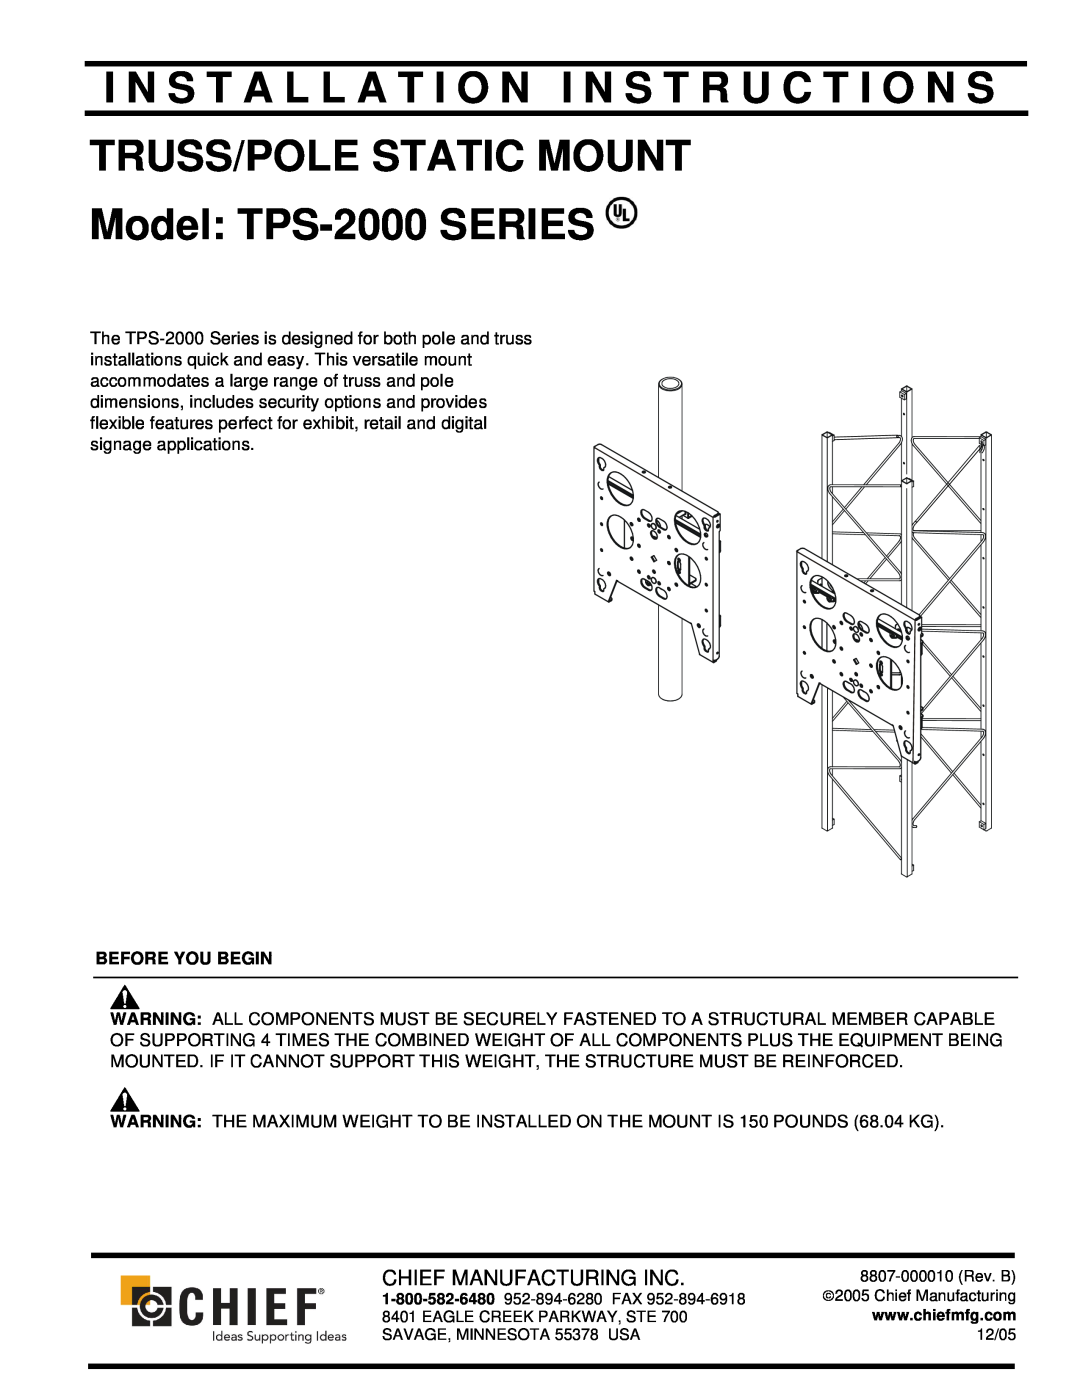 Chief Manufacturing TPS-2000 Series installation instructions Before You Begin, Chief Manufacturing Inc 